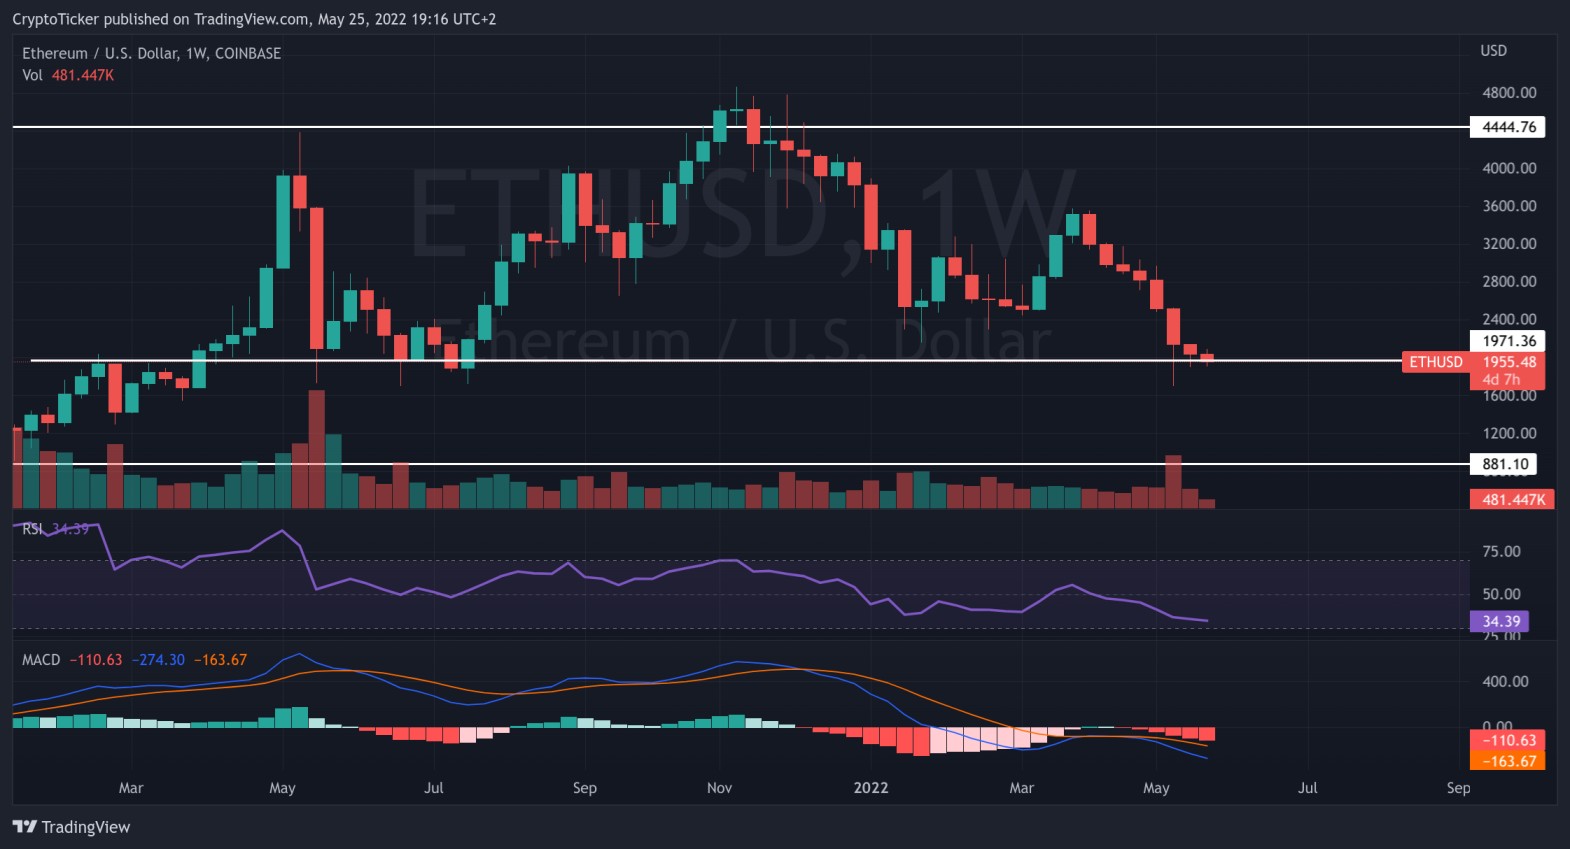 ETH/USD 1-week chart showing Ether's price action